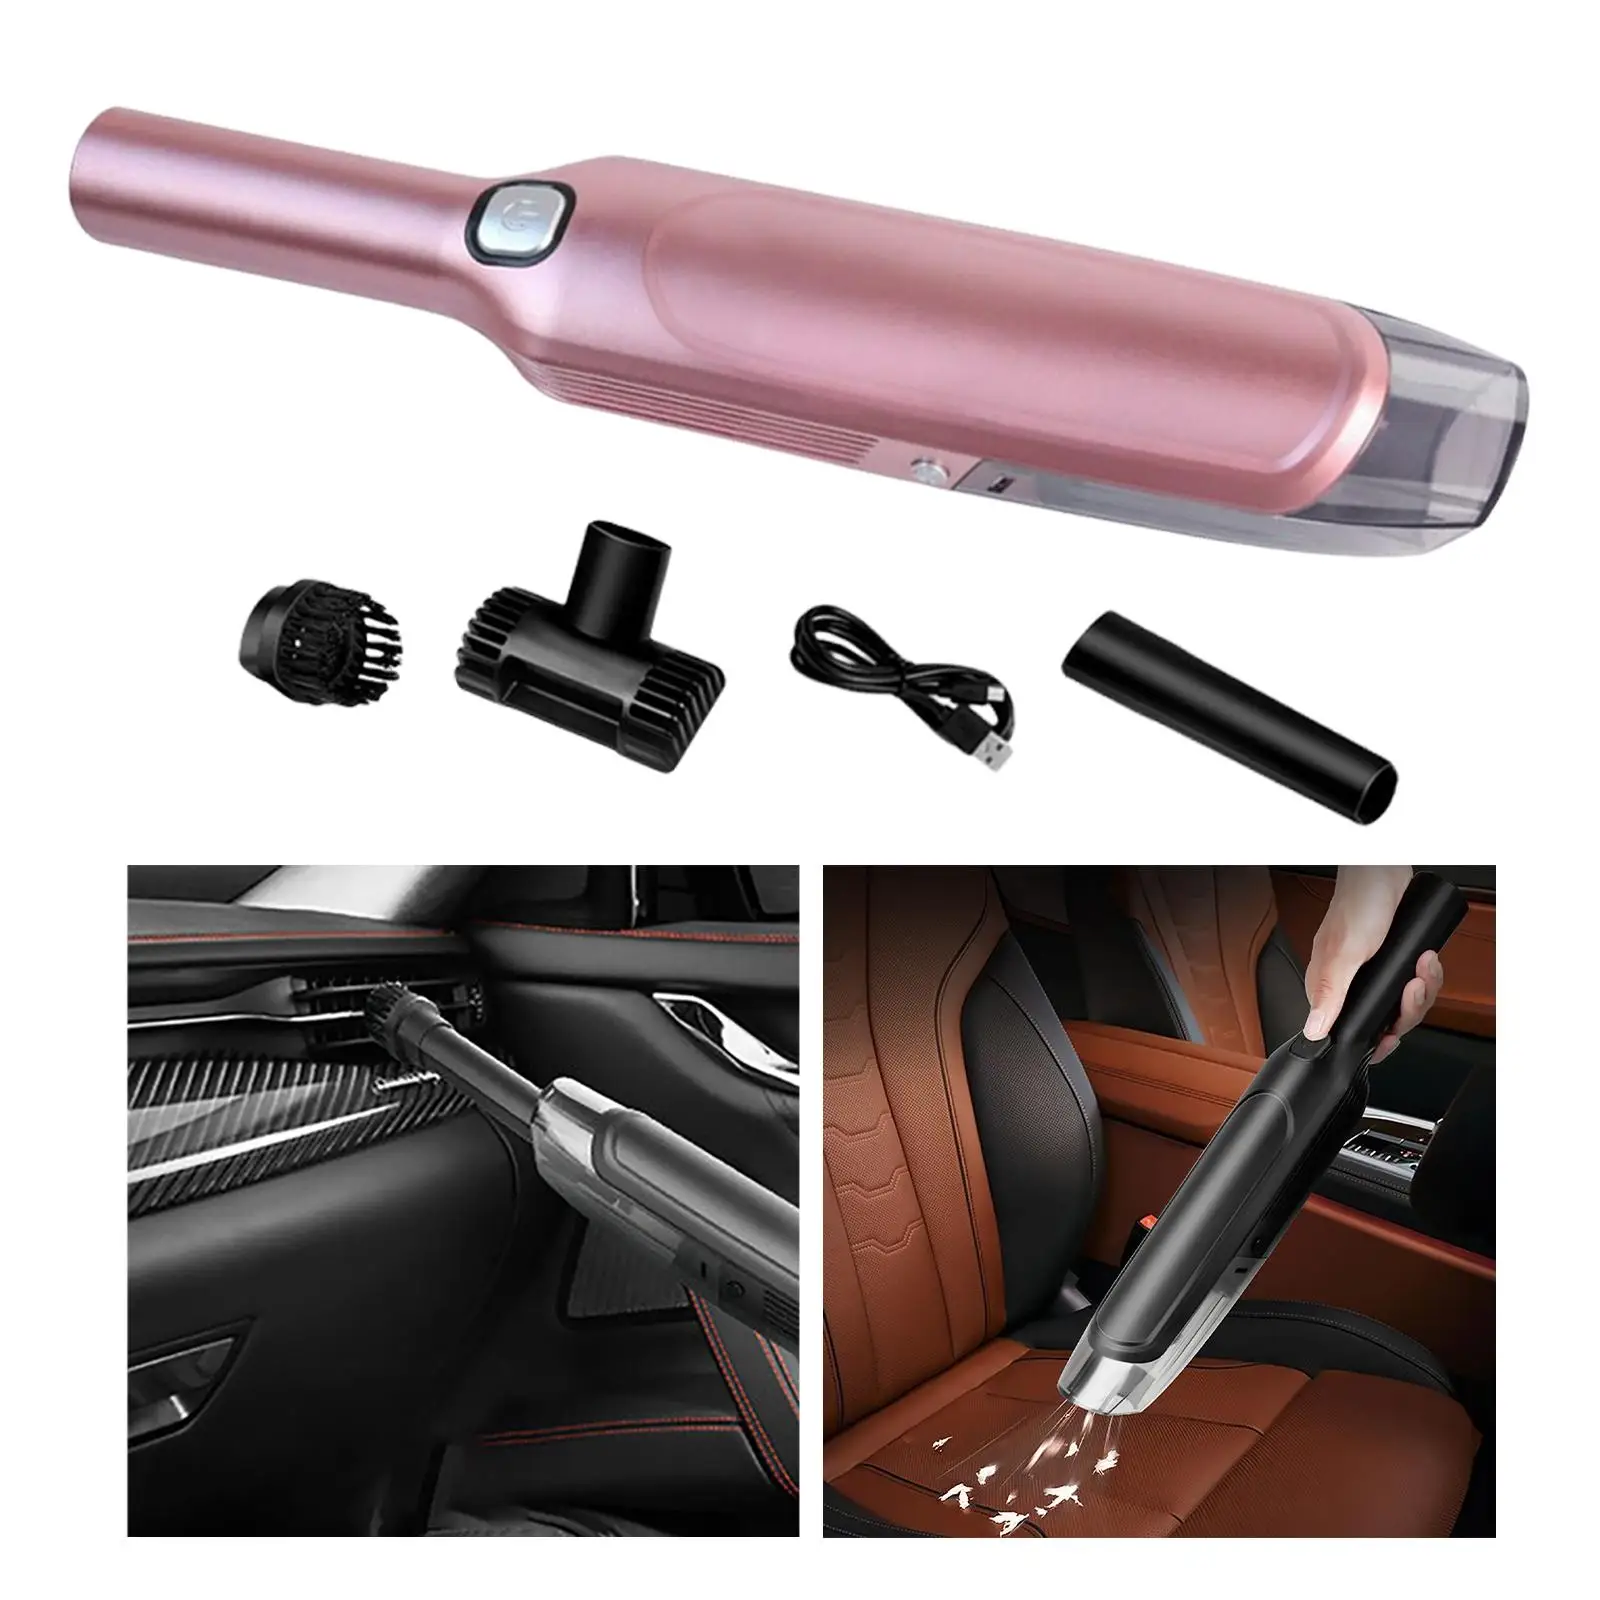 Portable Car Vacuum Cleaner 50000R/Min USB Rechargeable Crevices Fast Charge